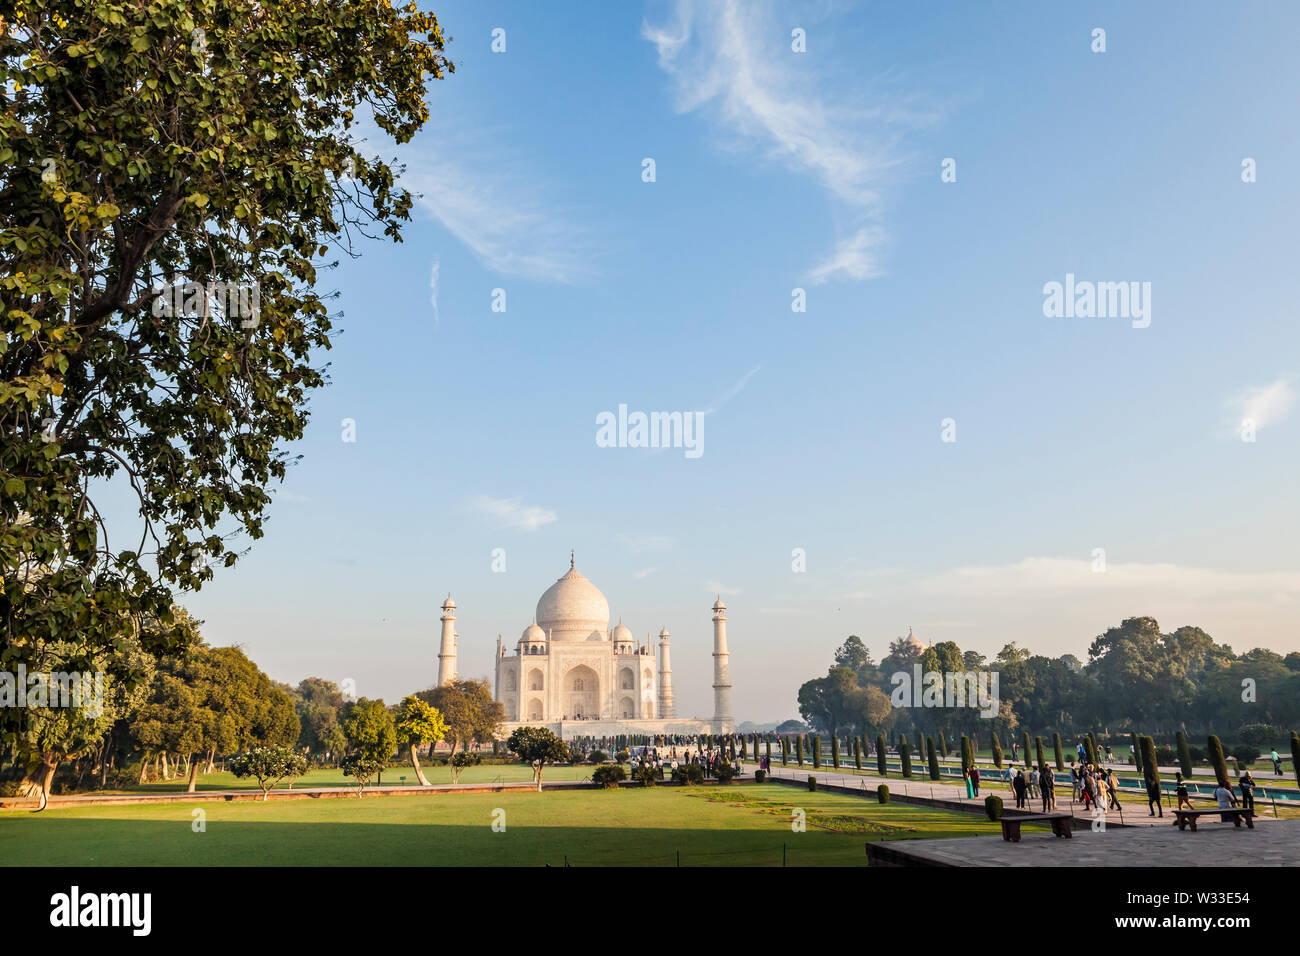 The Taj Mahal in the early morning as seen from an angle off to the side. Agra, Uttar Pradesh,  India. Stock Photo